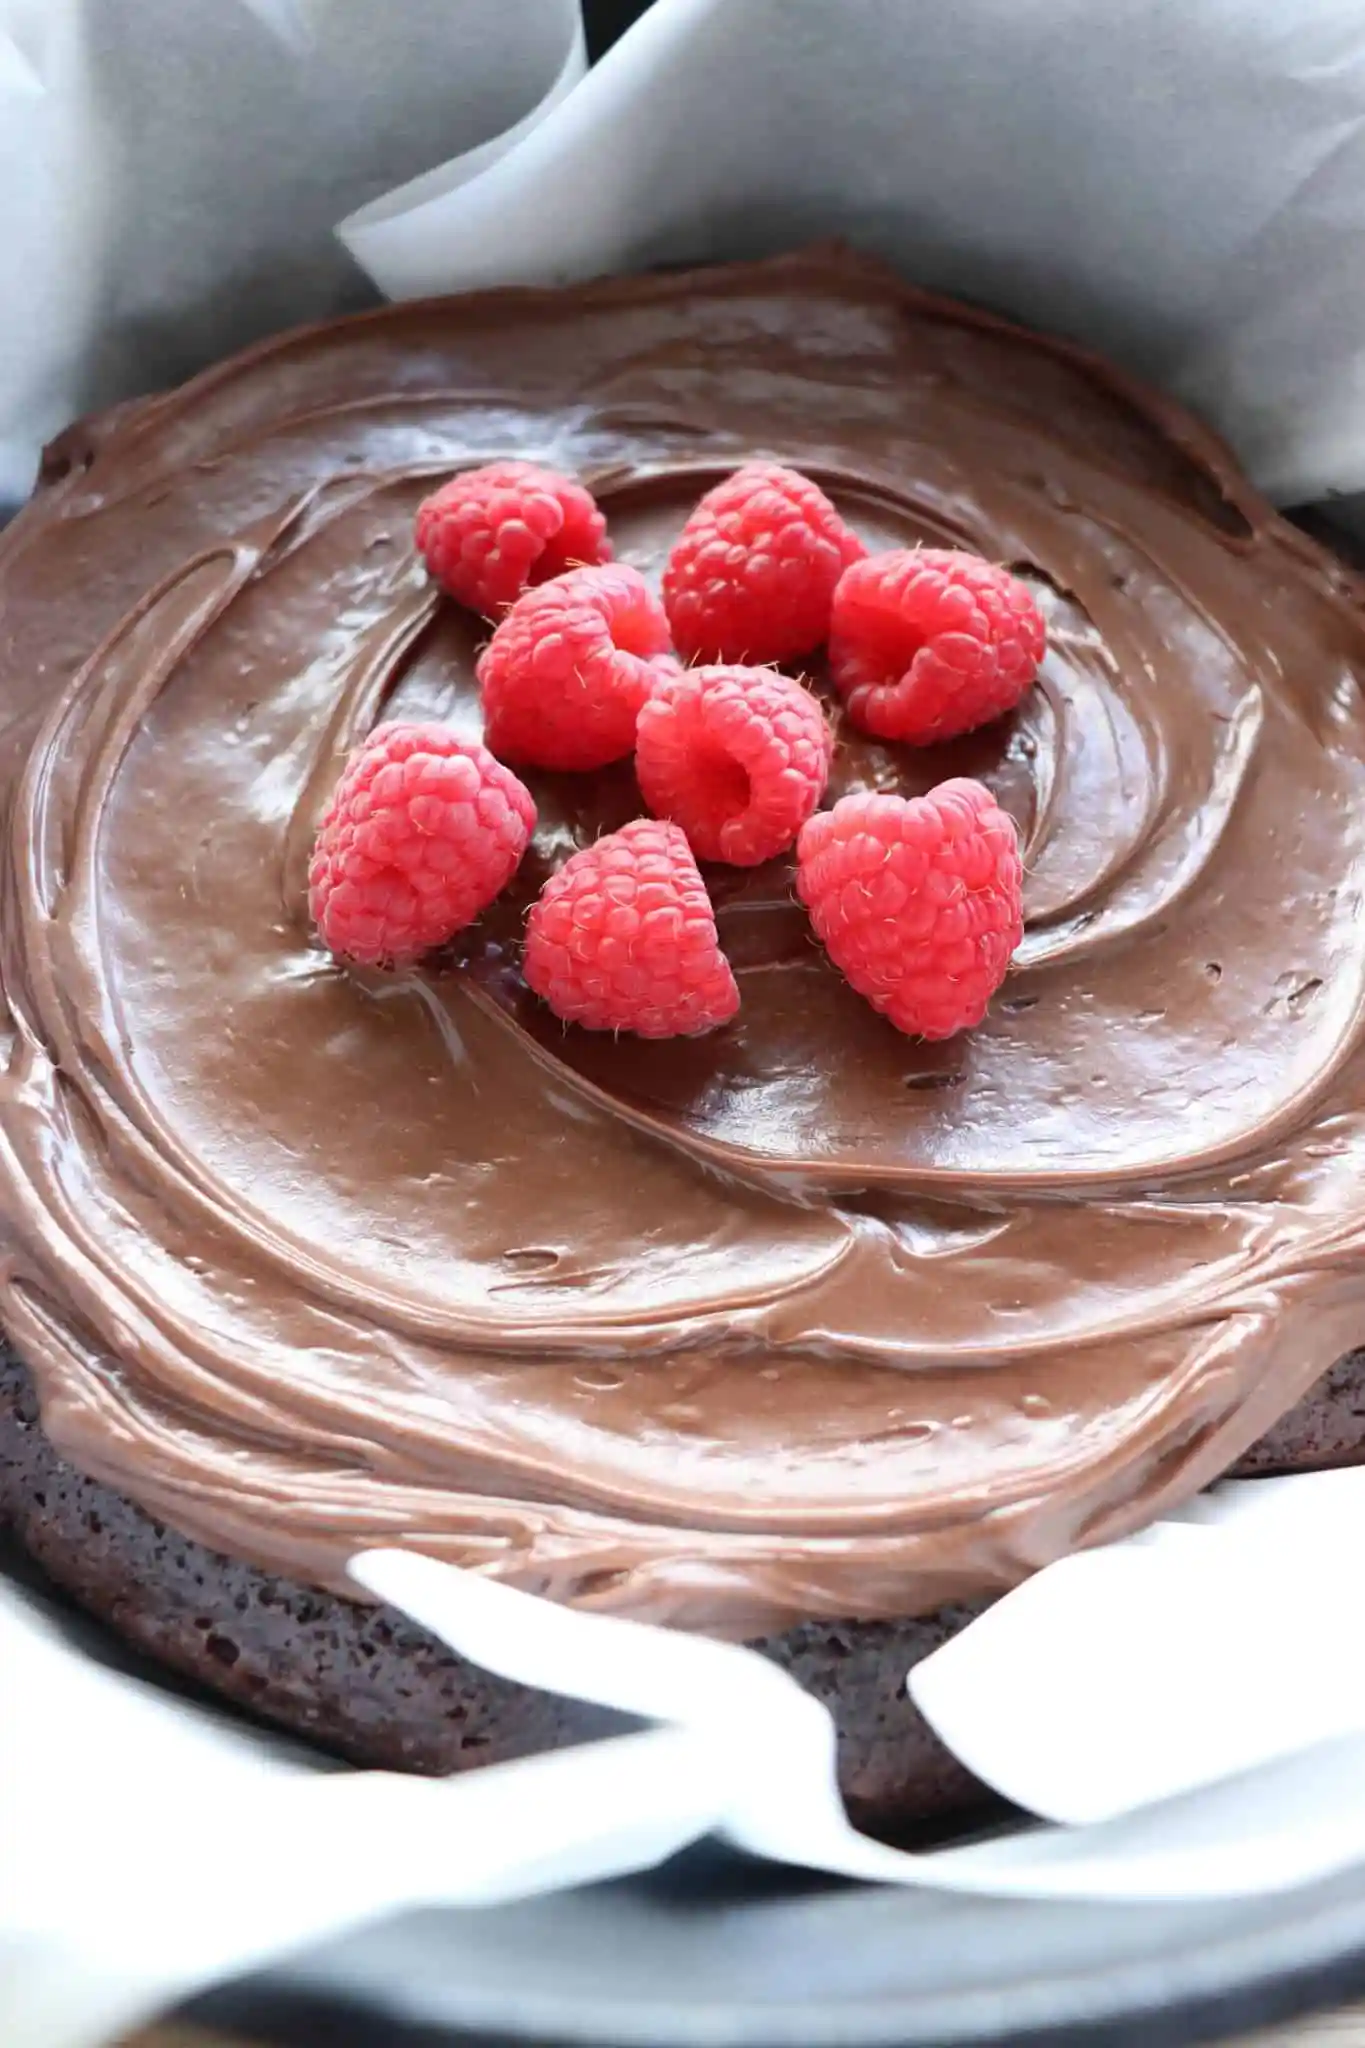 Chocolate cake topped with whole raspberries.